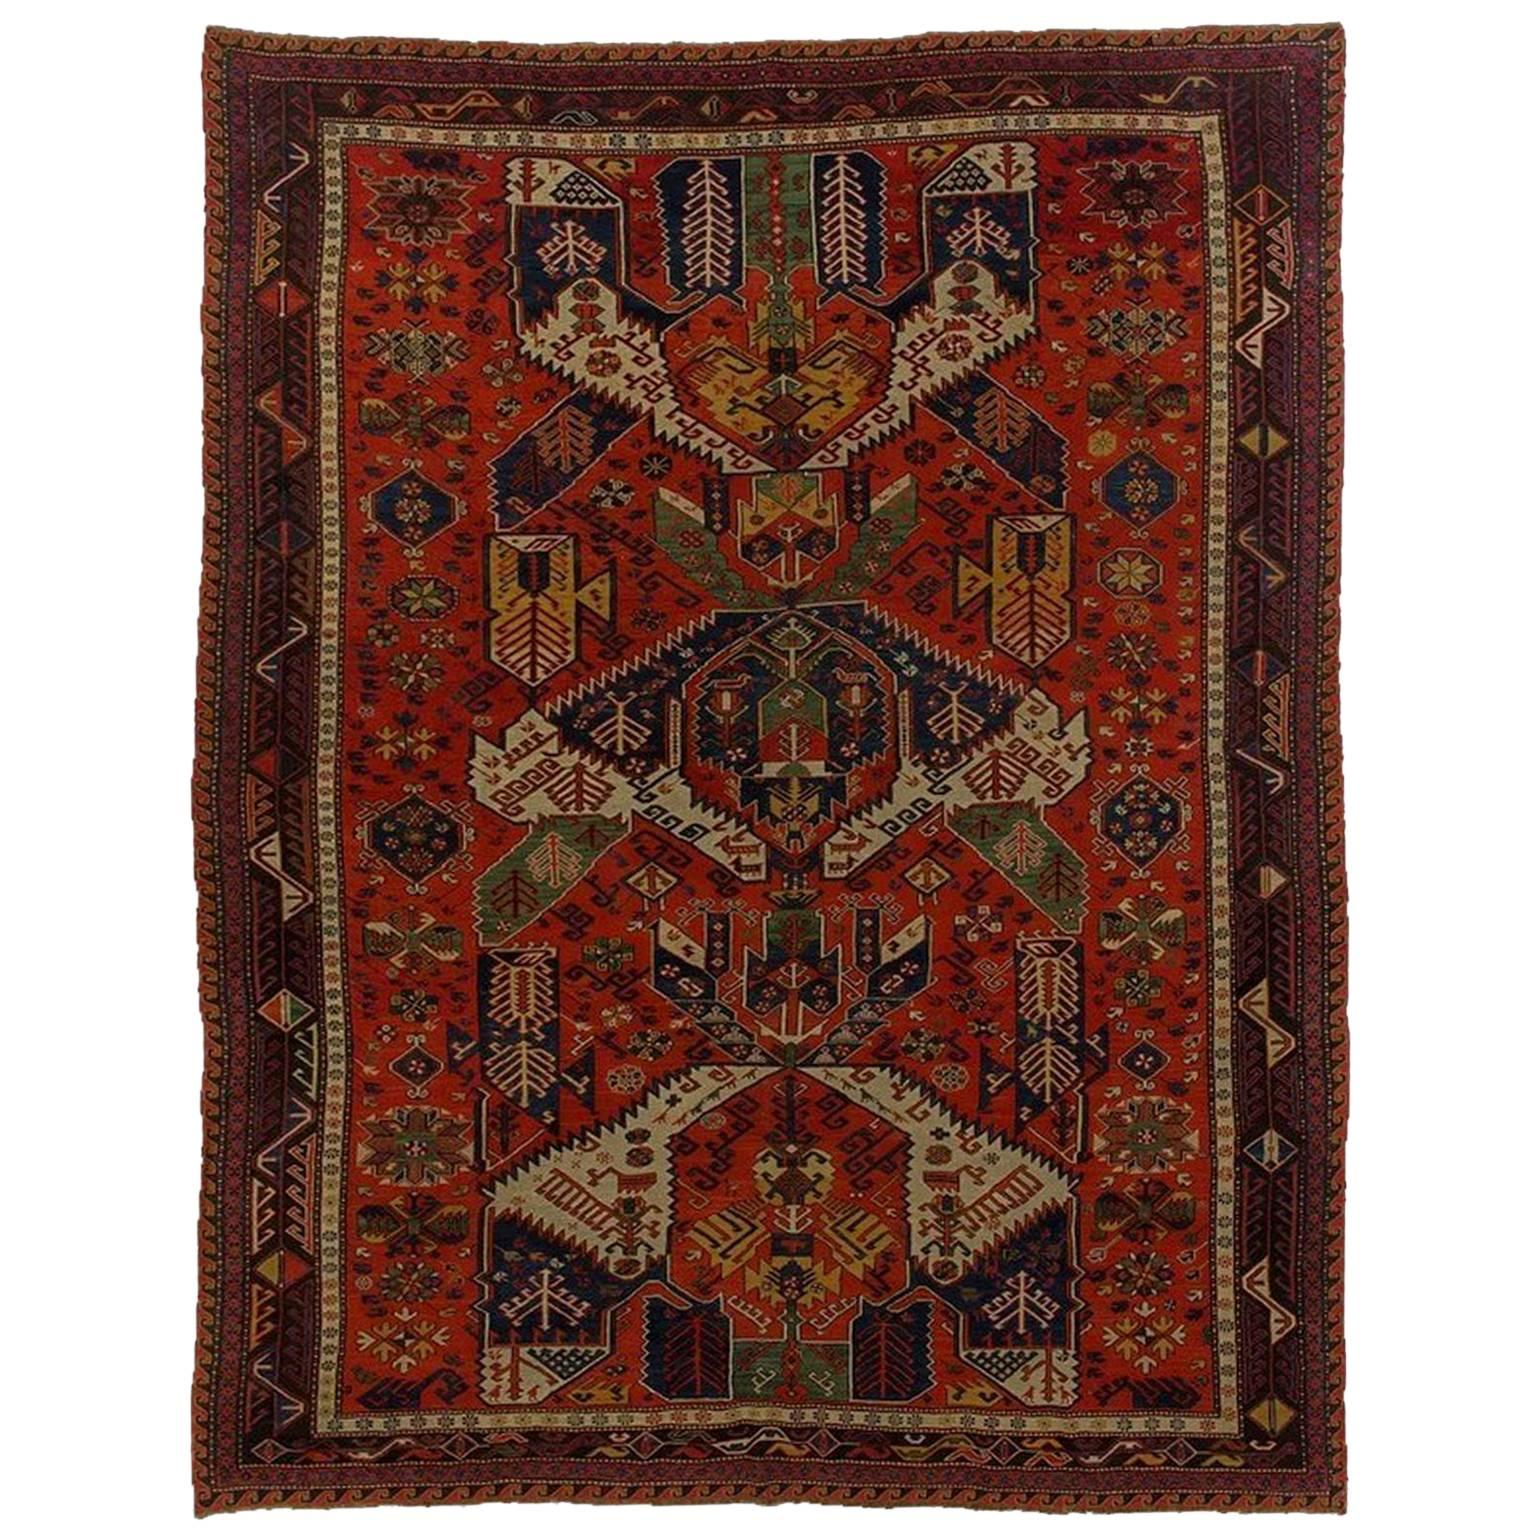 19th Century Caucasian Dragon Sumak Rug Hand-Knotted in Wool Red Green Yellow For Sale